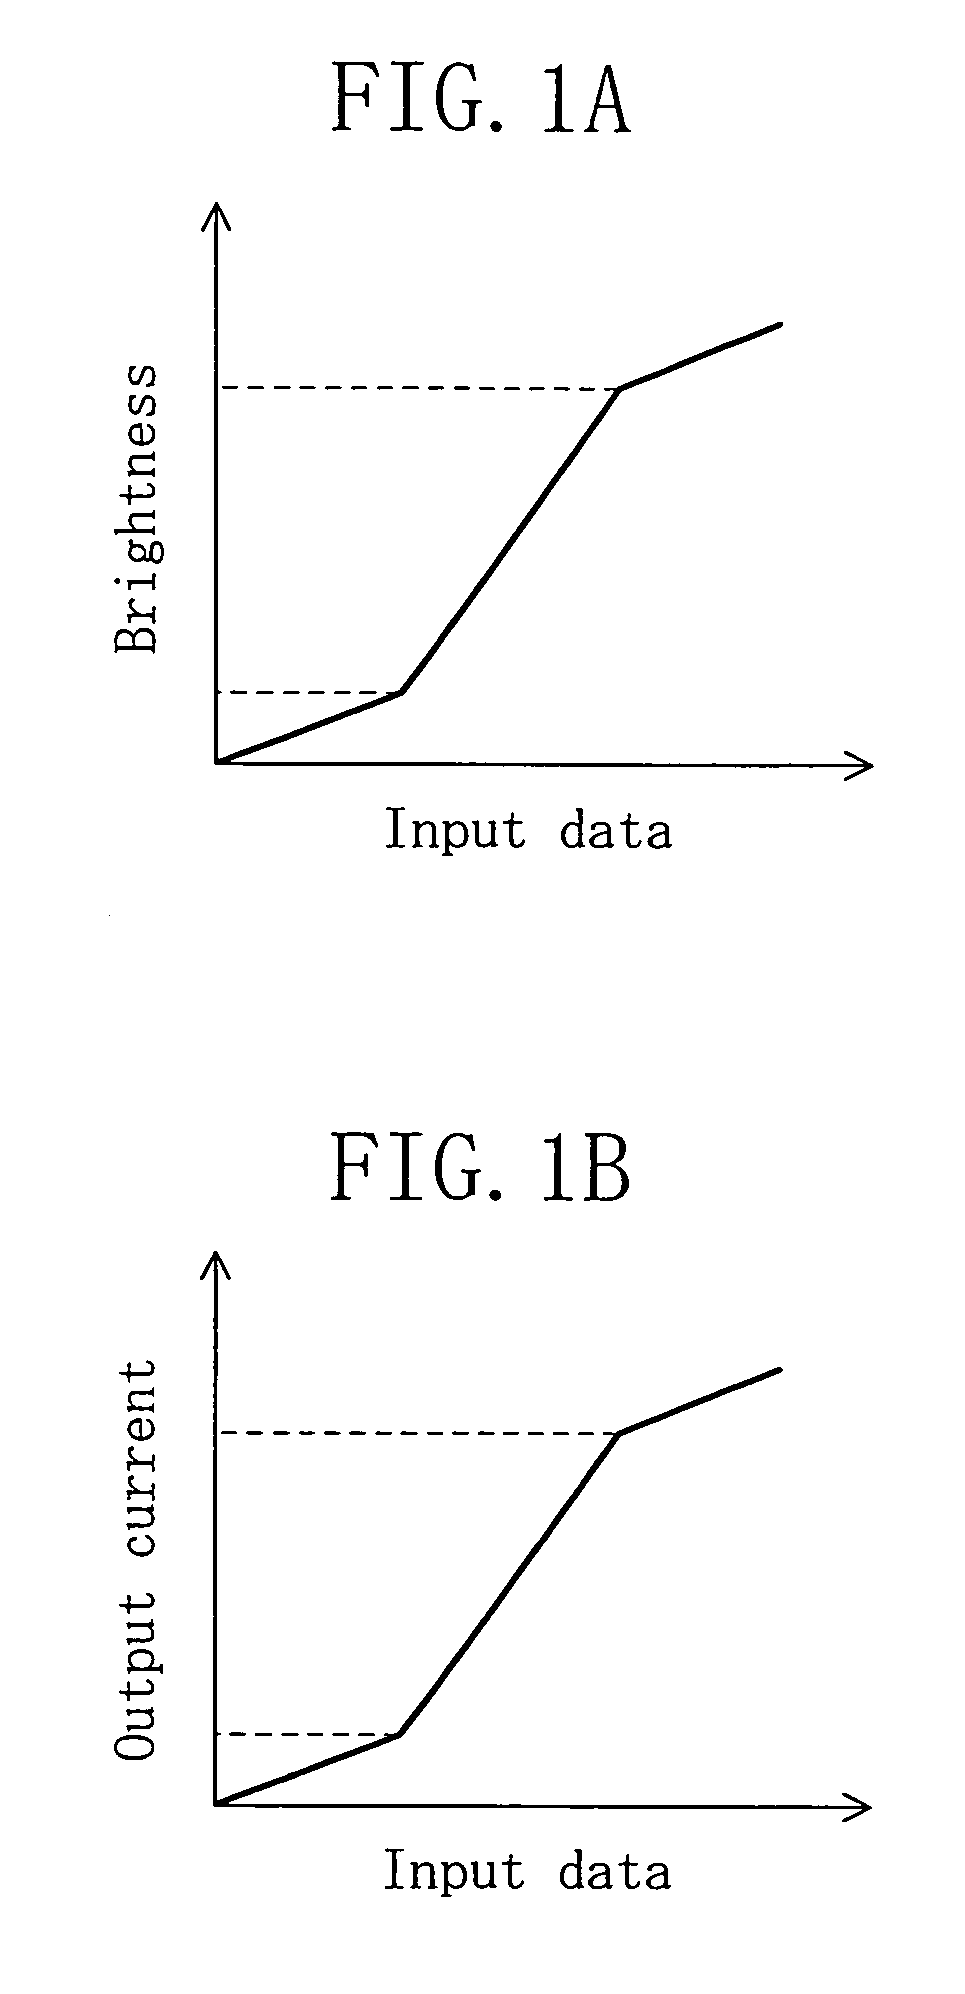 Current driver and display device